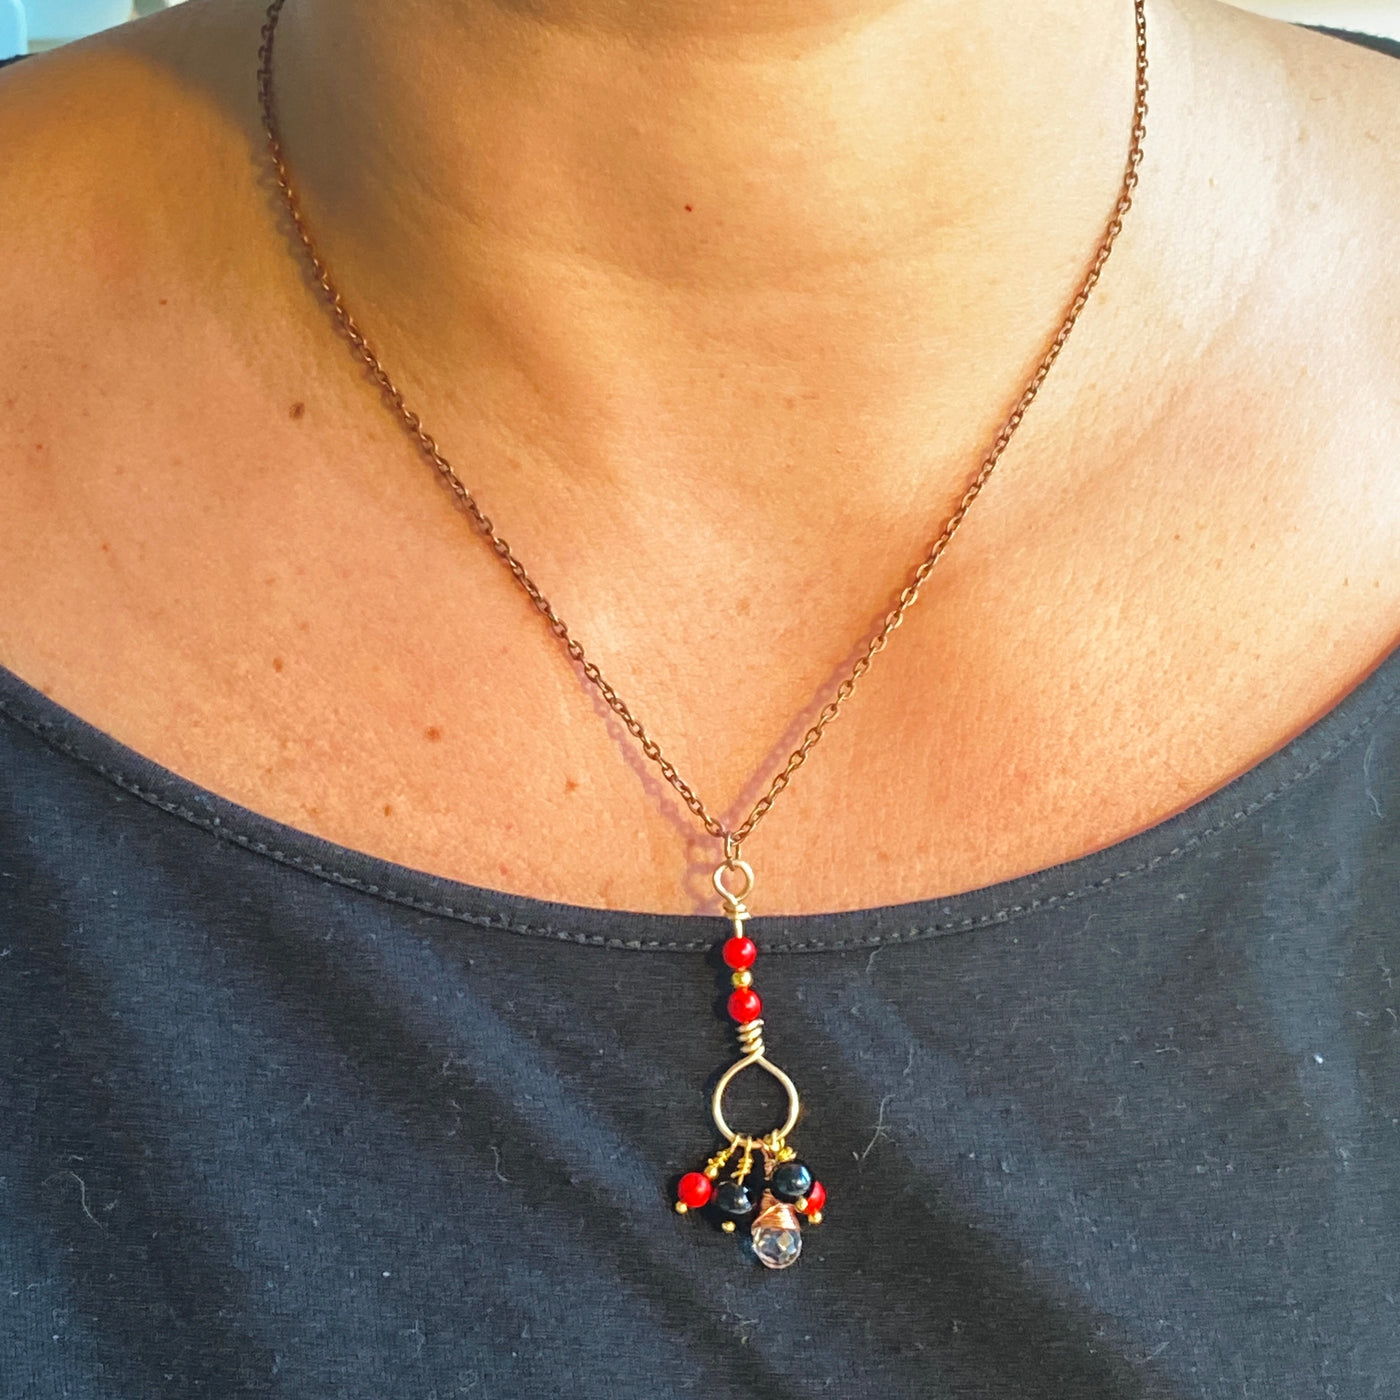 Pendant: Onice, red turquoise and quartz briolette for Shake and move collection